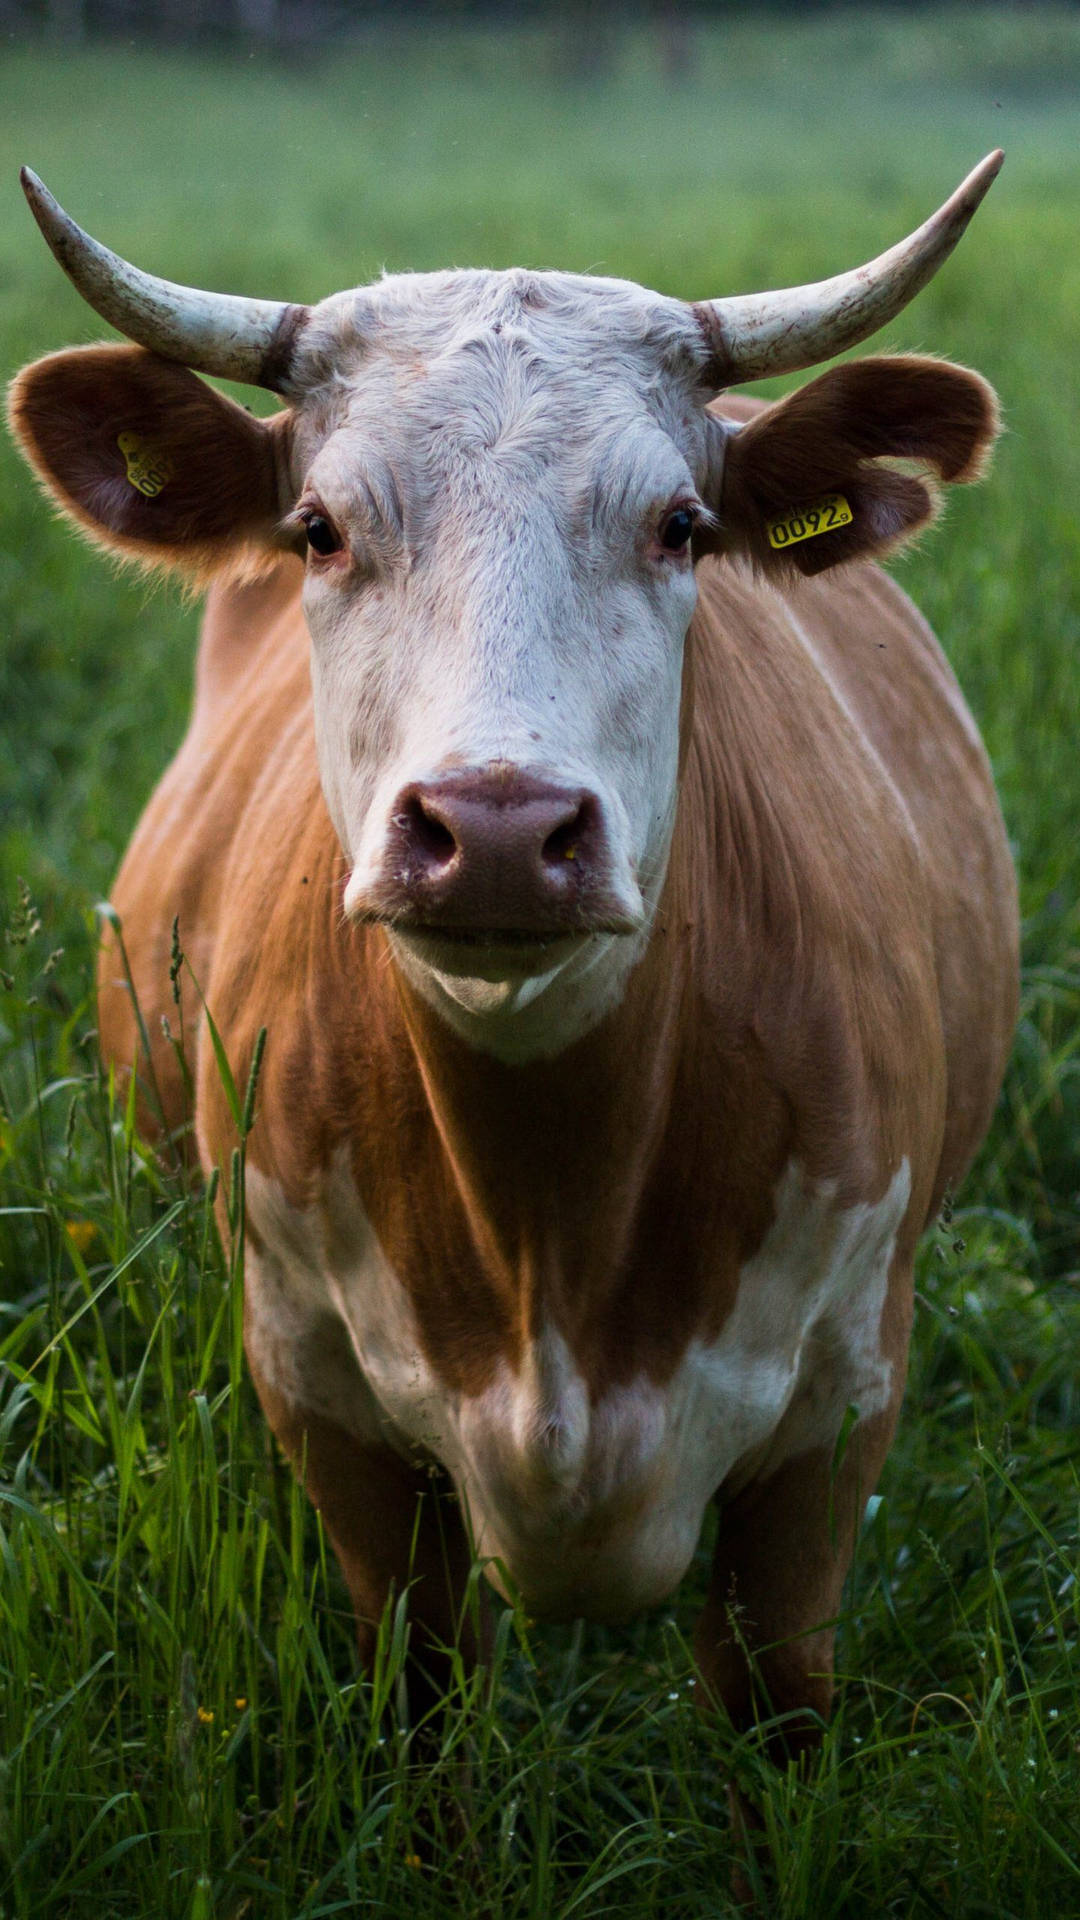 “This beautiful cow with big horns is ready to graze.” Wallpaper